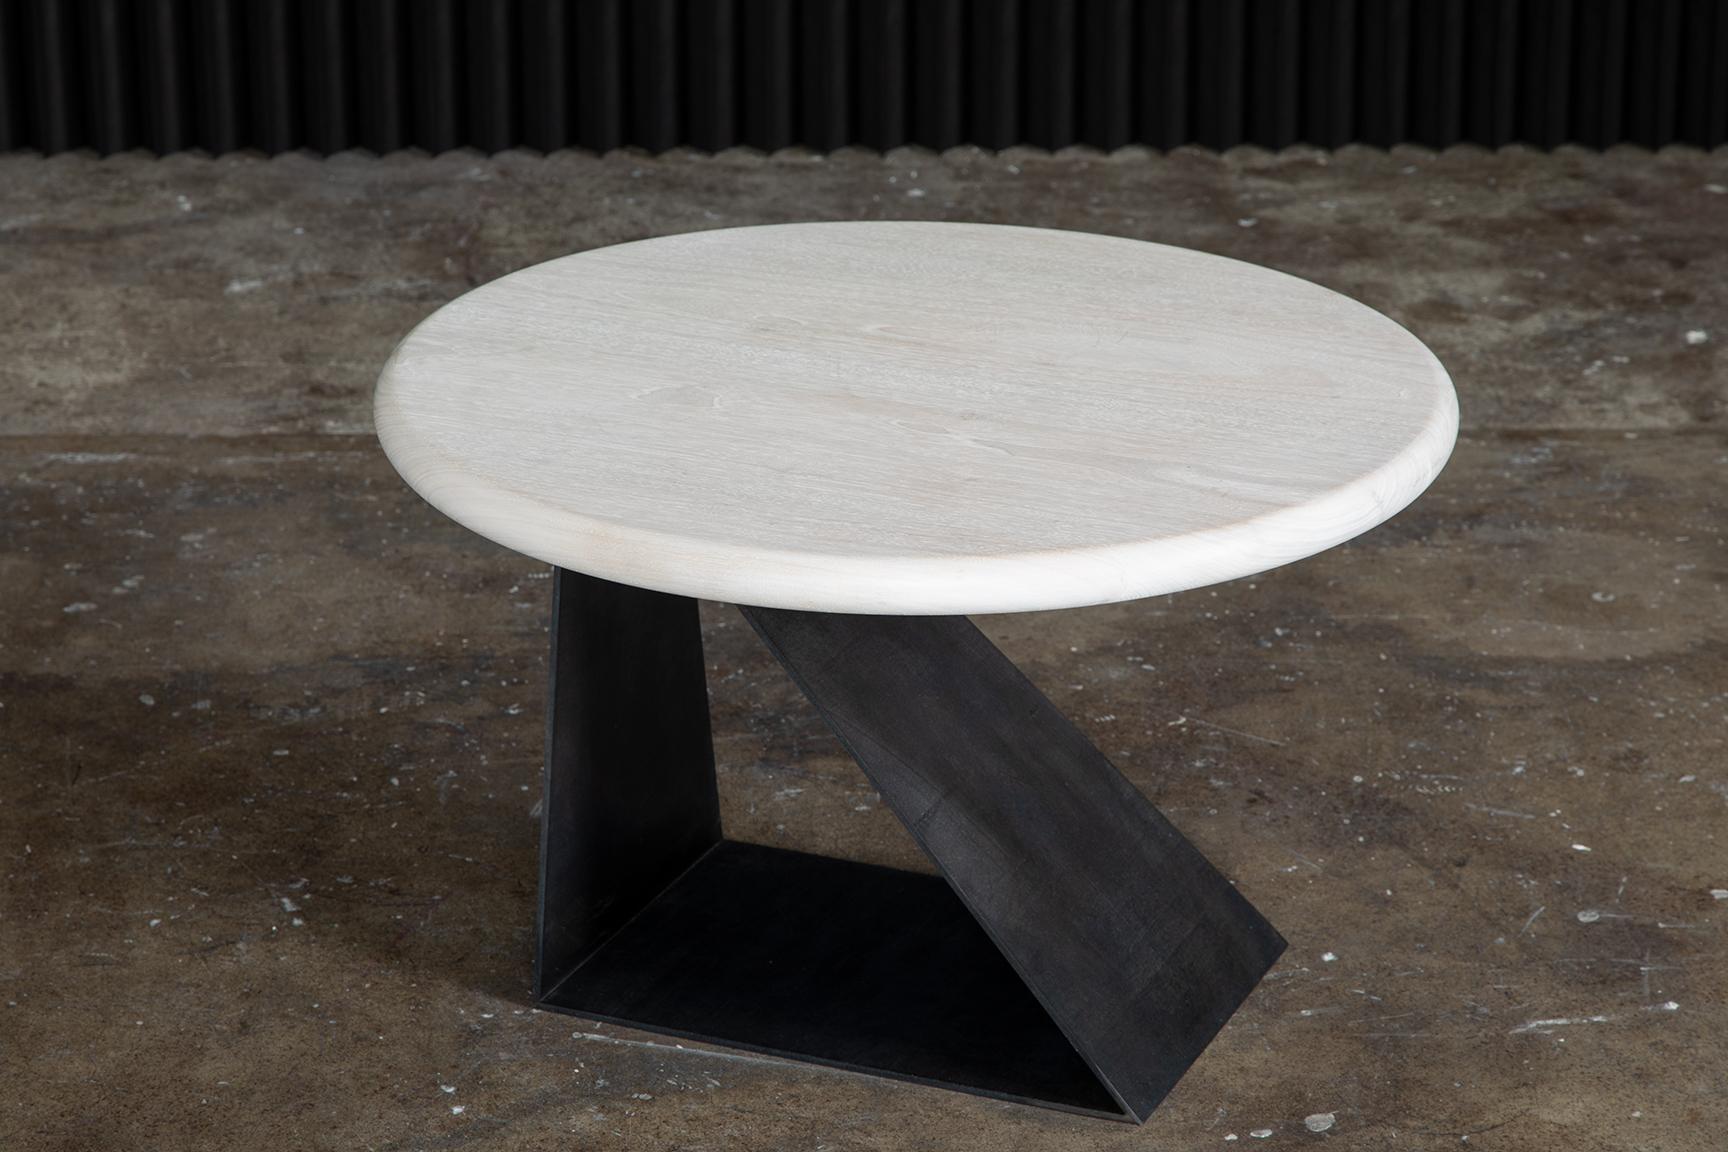 Form and function. The Haider Side Table takes cues from Haider Ackerman's designs—sharp edges made possible by darts and unexpected seaming, an edginess that is emulated in the base of this piece. Harsh lines and clean edges offer a beautiful